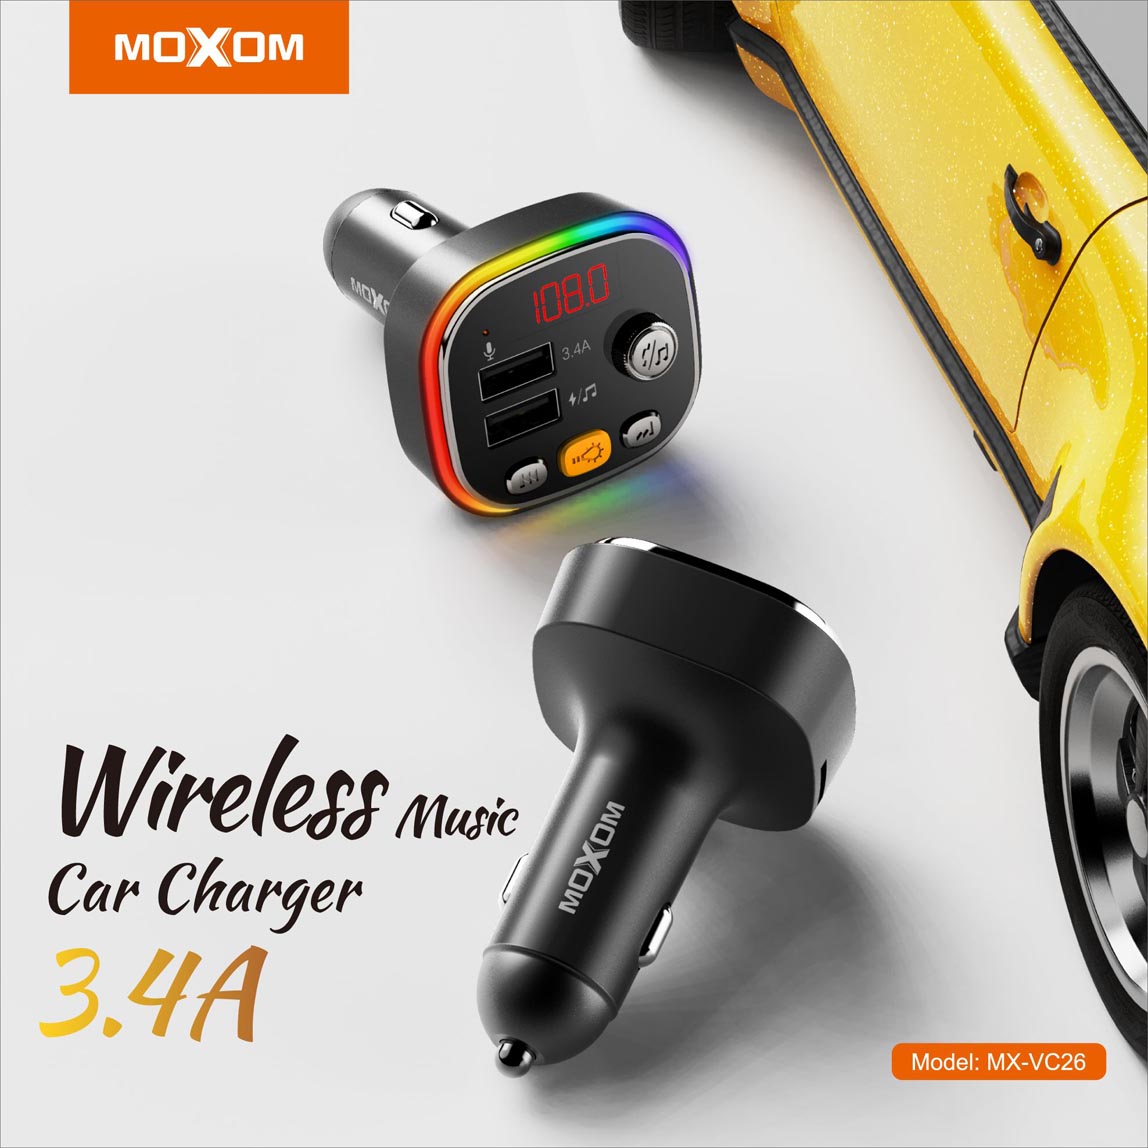 Wireless Music Car Charger MOXOM mx-VC25/VC-26